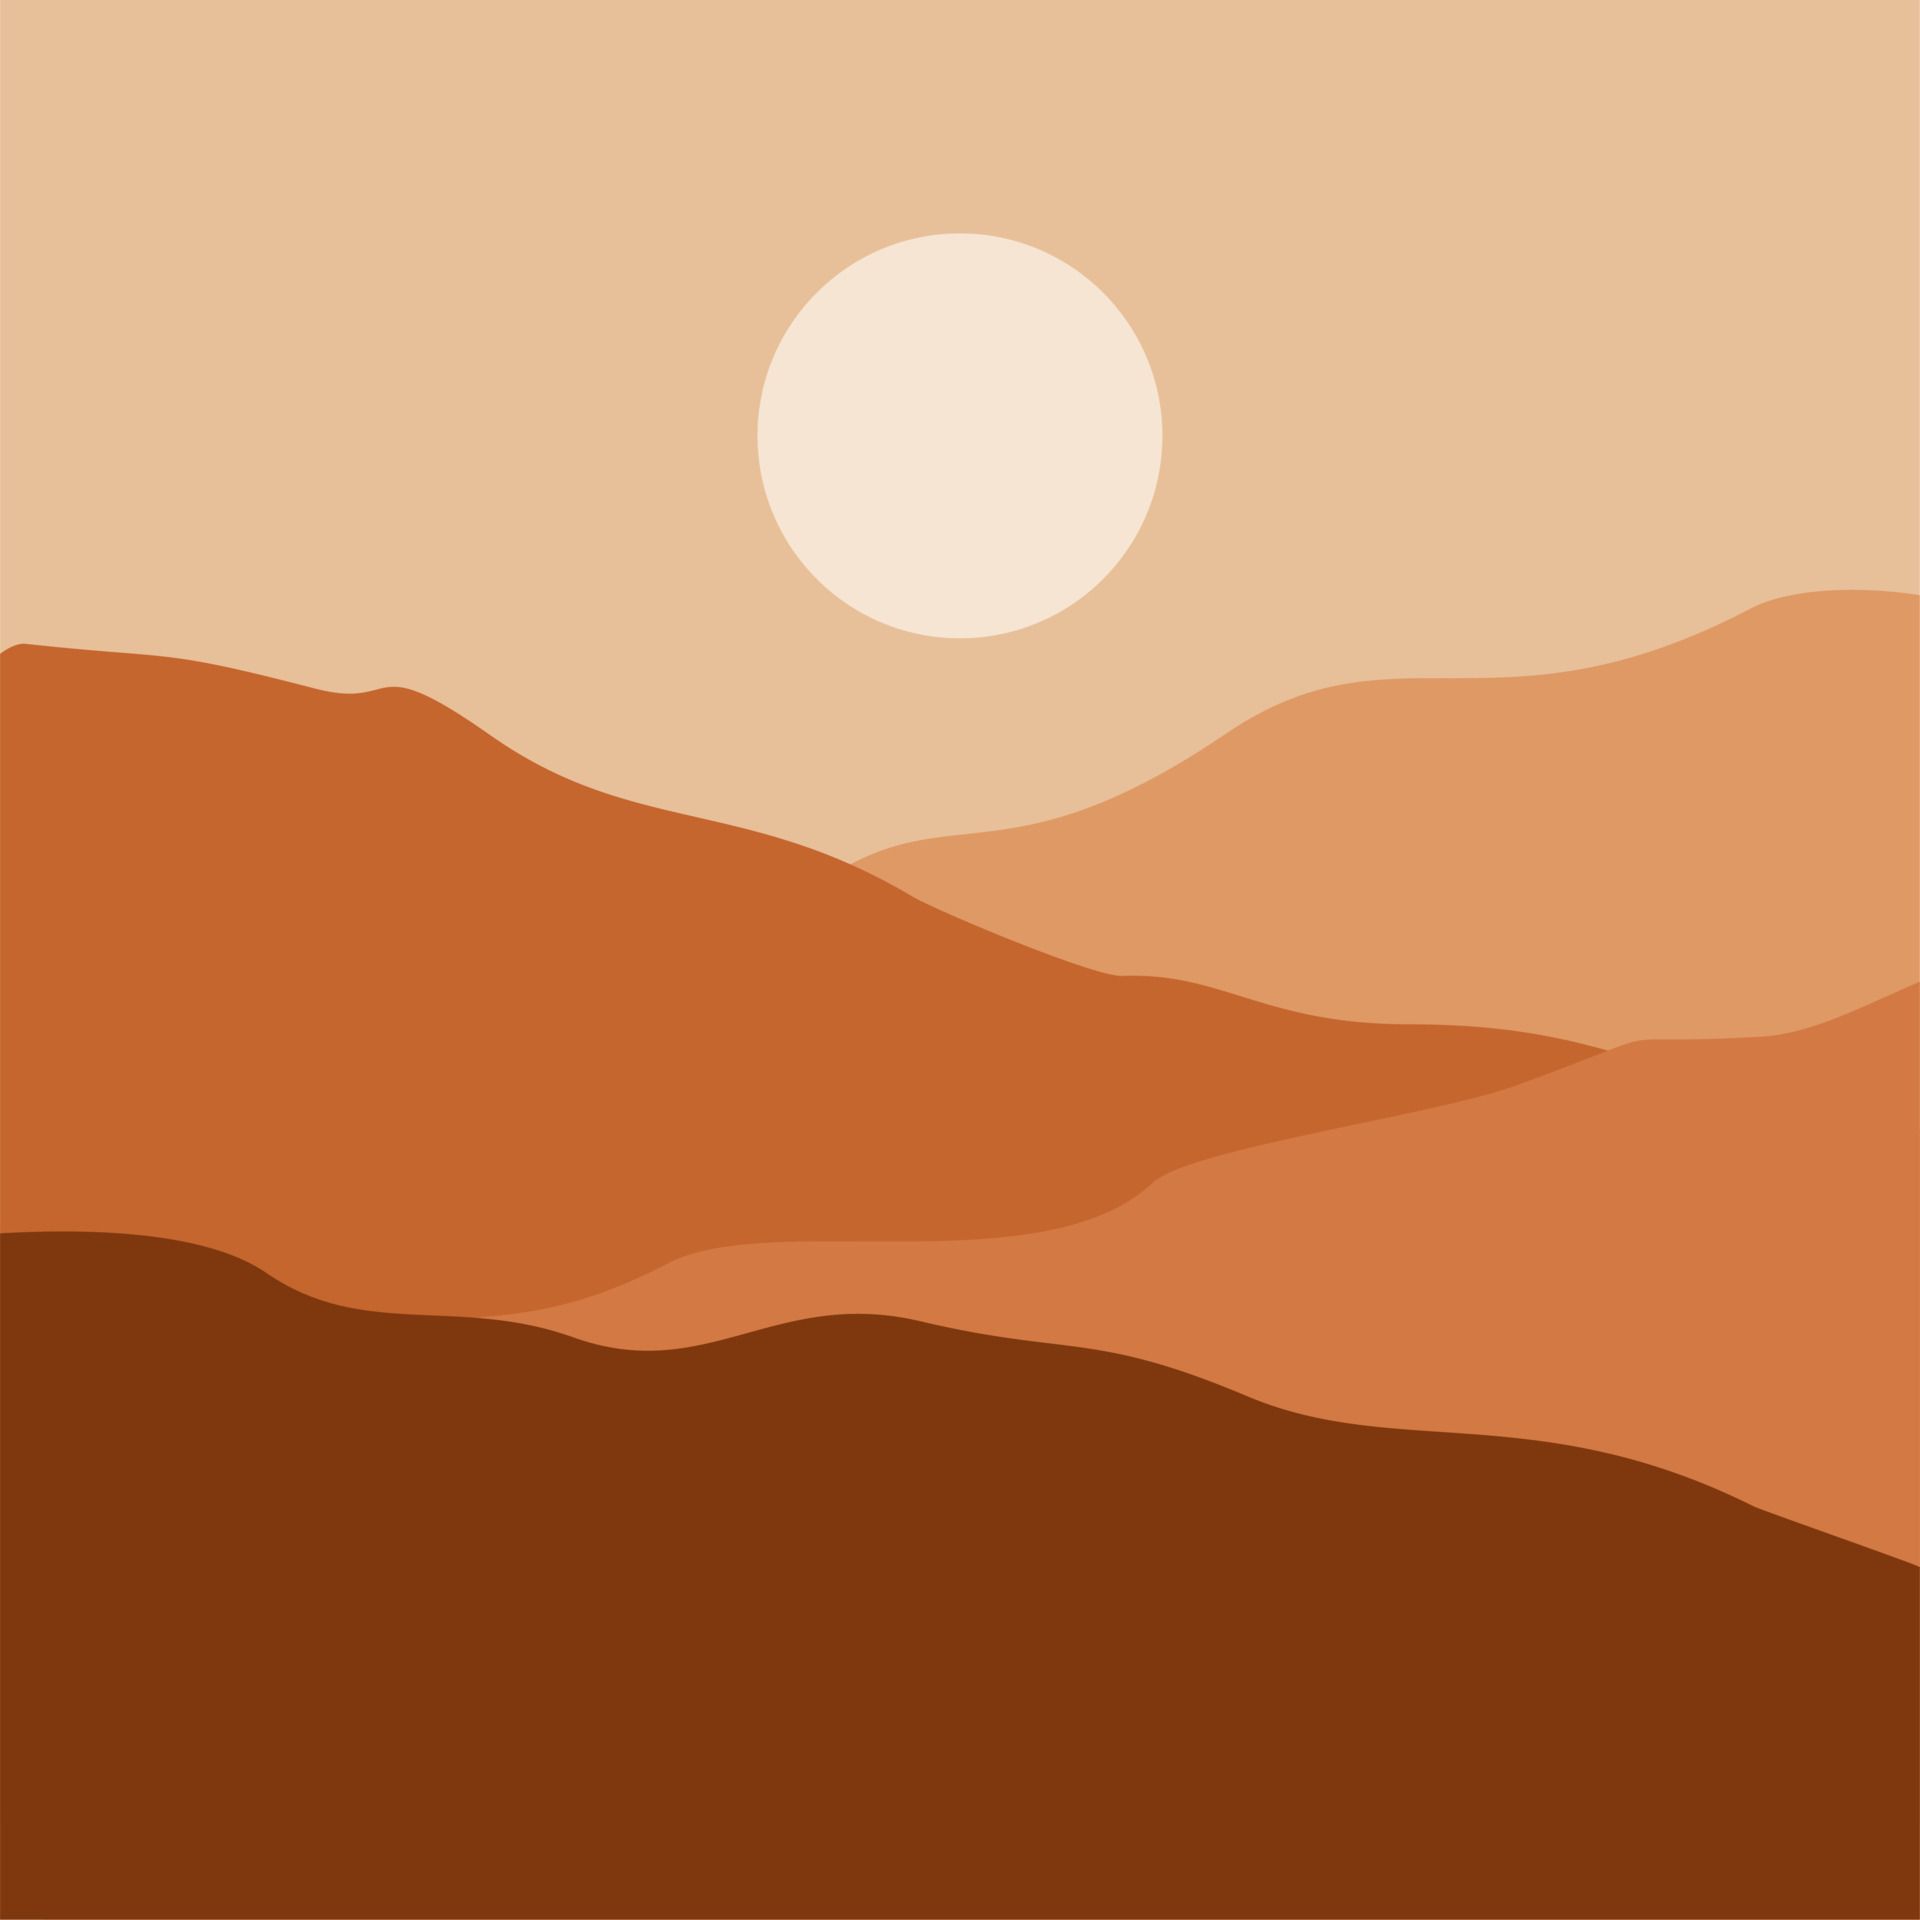 Abstract contemporary aesthetic background with desert, mountains, Sun. Earth tones, burnt orange, terracotta colors. Boho wall decor. landscapes set with sunrise, sunset. Earth tones, pastel colors